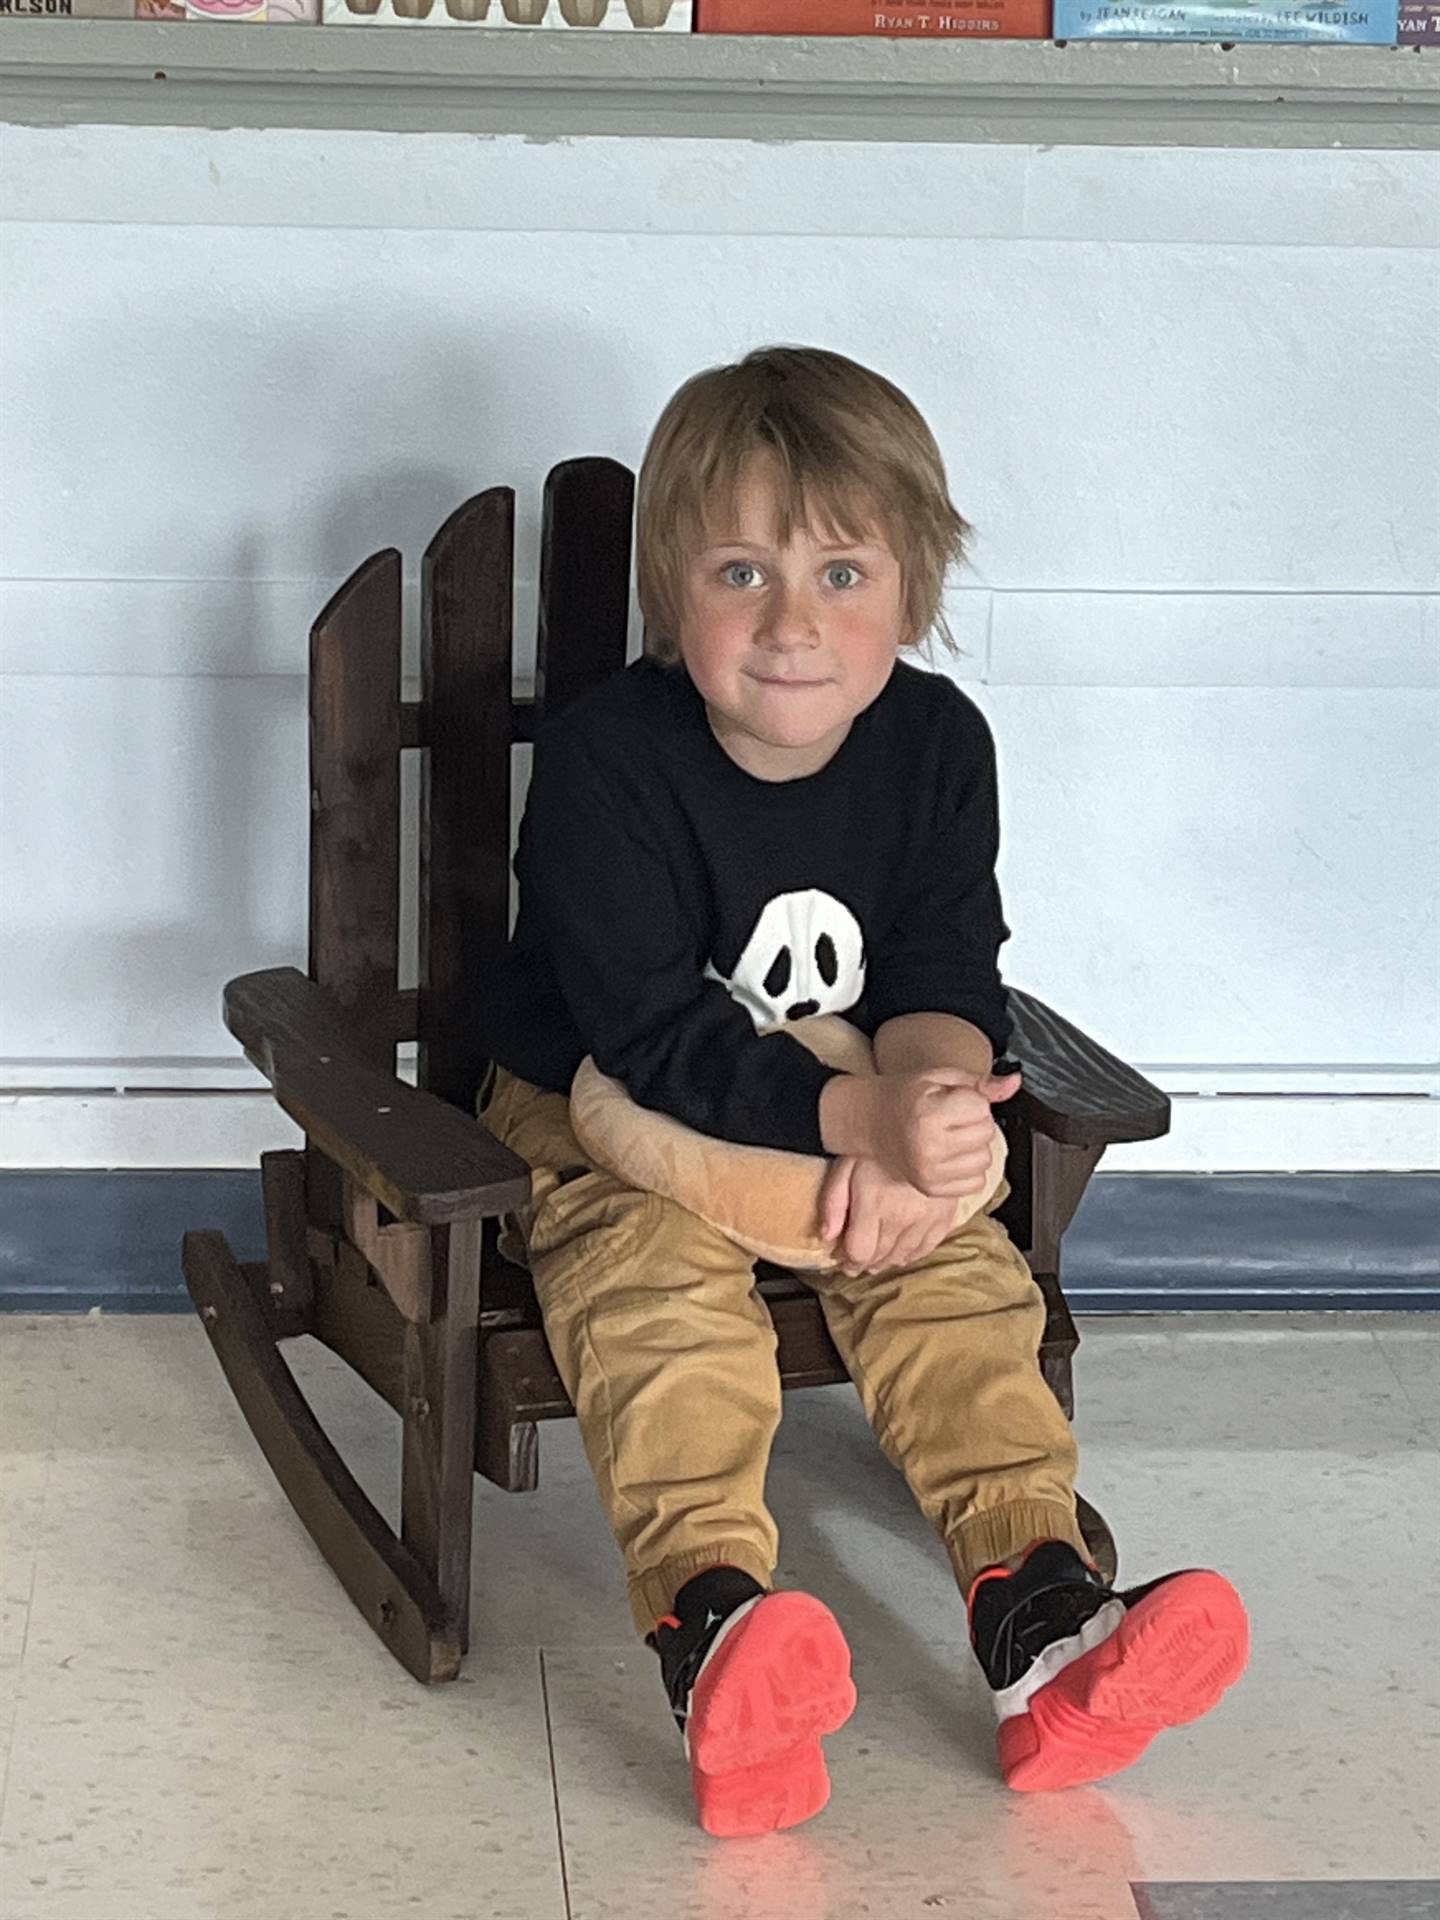 A student takes a break to clear his mind in a rocking chair.